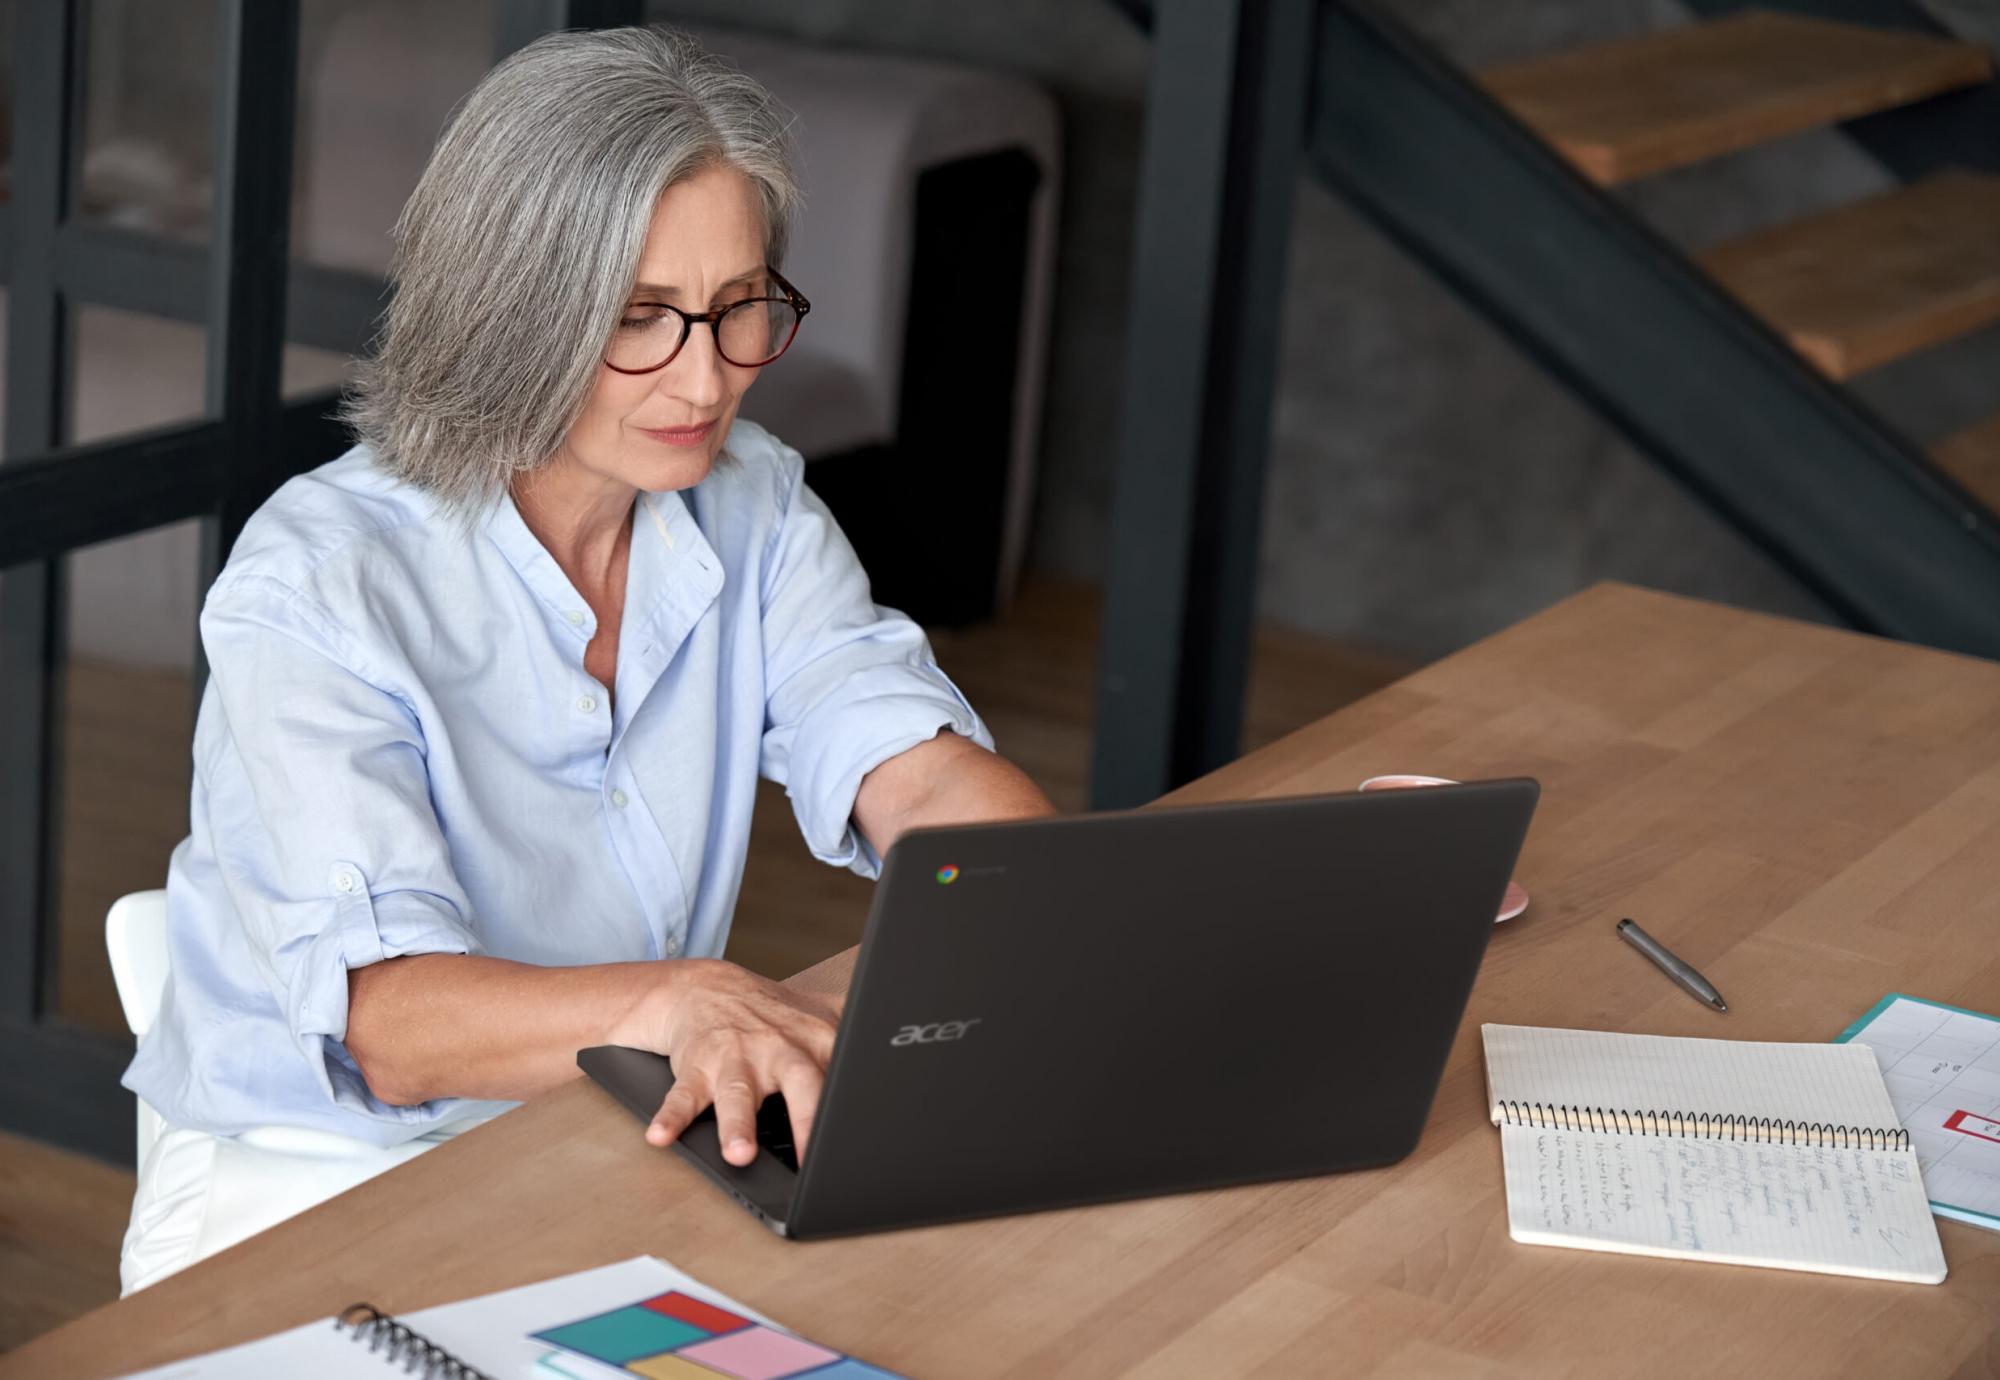 Woman using an Acer computer for business